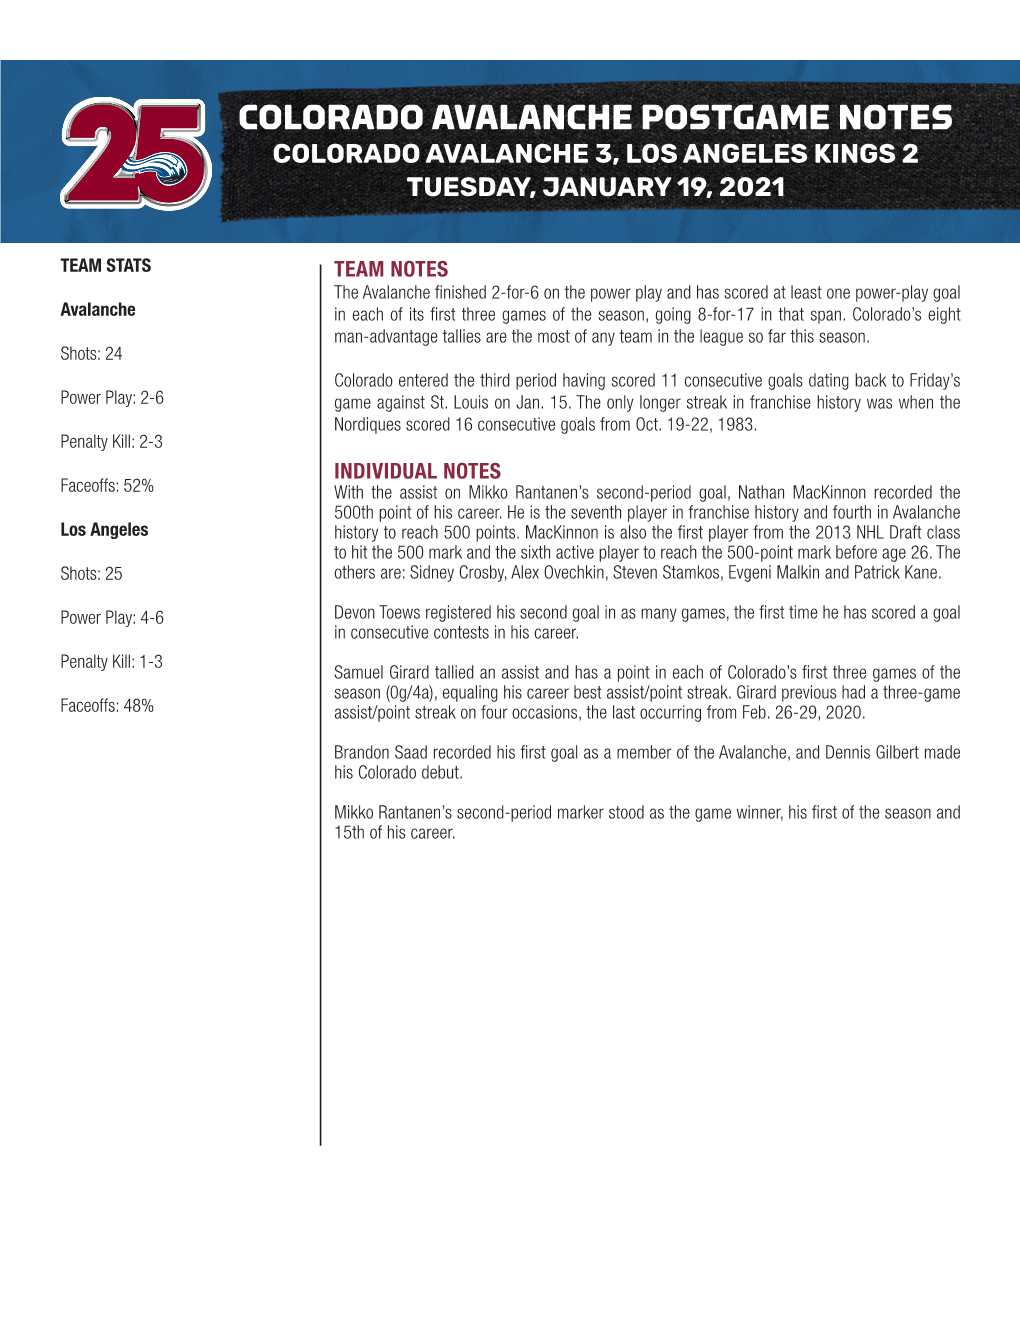 Colorado Avalanche Postgame Notes Colorado Avalanche 3, Los Angeles Kings 2 Tuesday, January 19, 2021